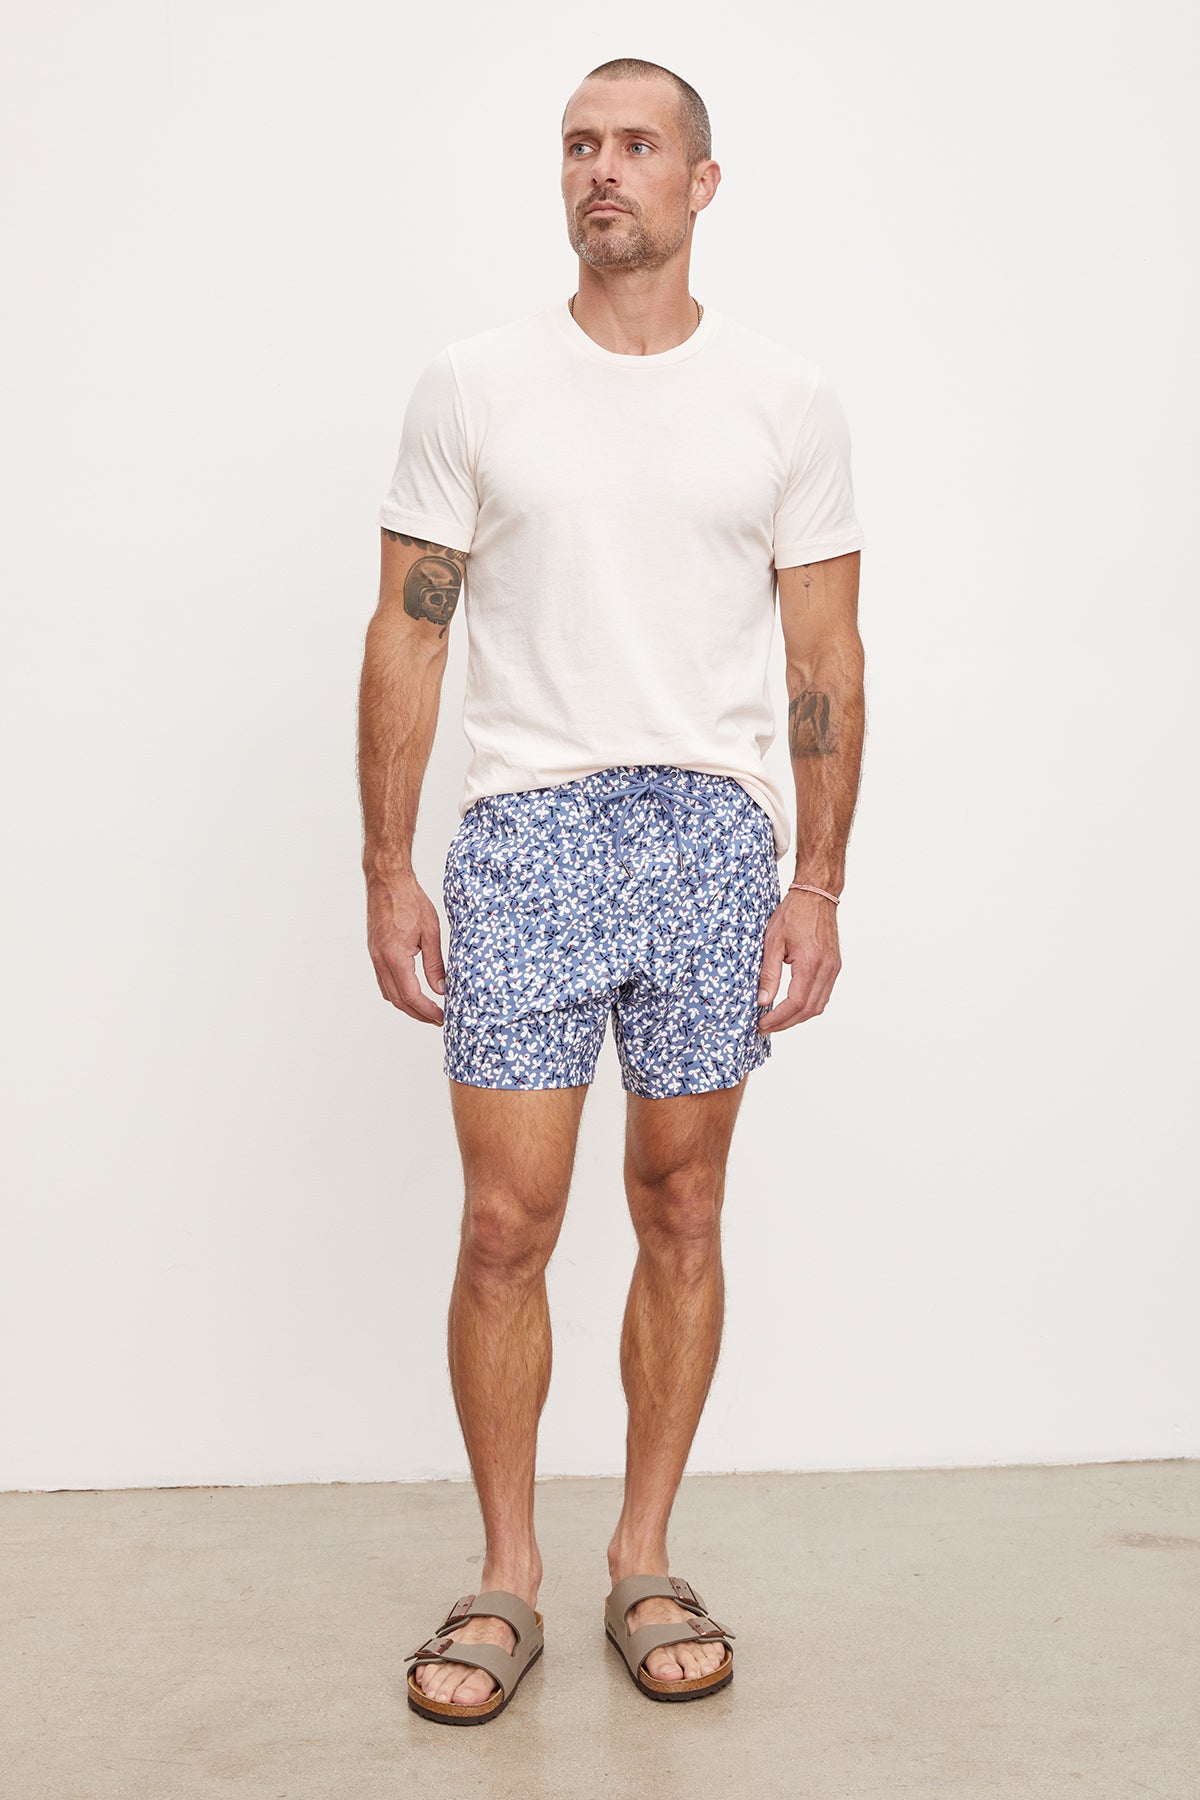 A man standing against a white background wearing a white t-shirt, Velvet by Graham & Spencer RICARDO SWIM SHORTS, and brown sandals. He has tattoos on his arms and is looking to the side.-36918541811905